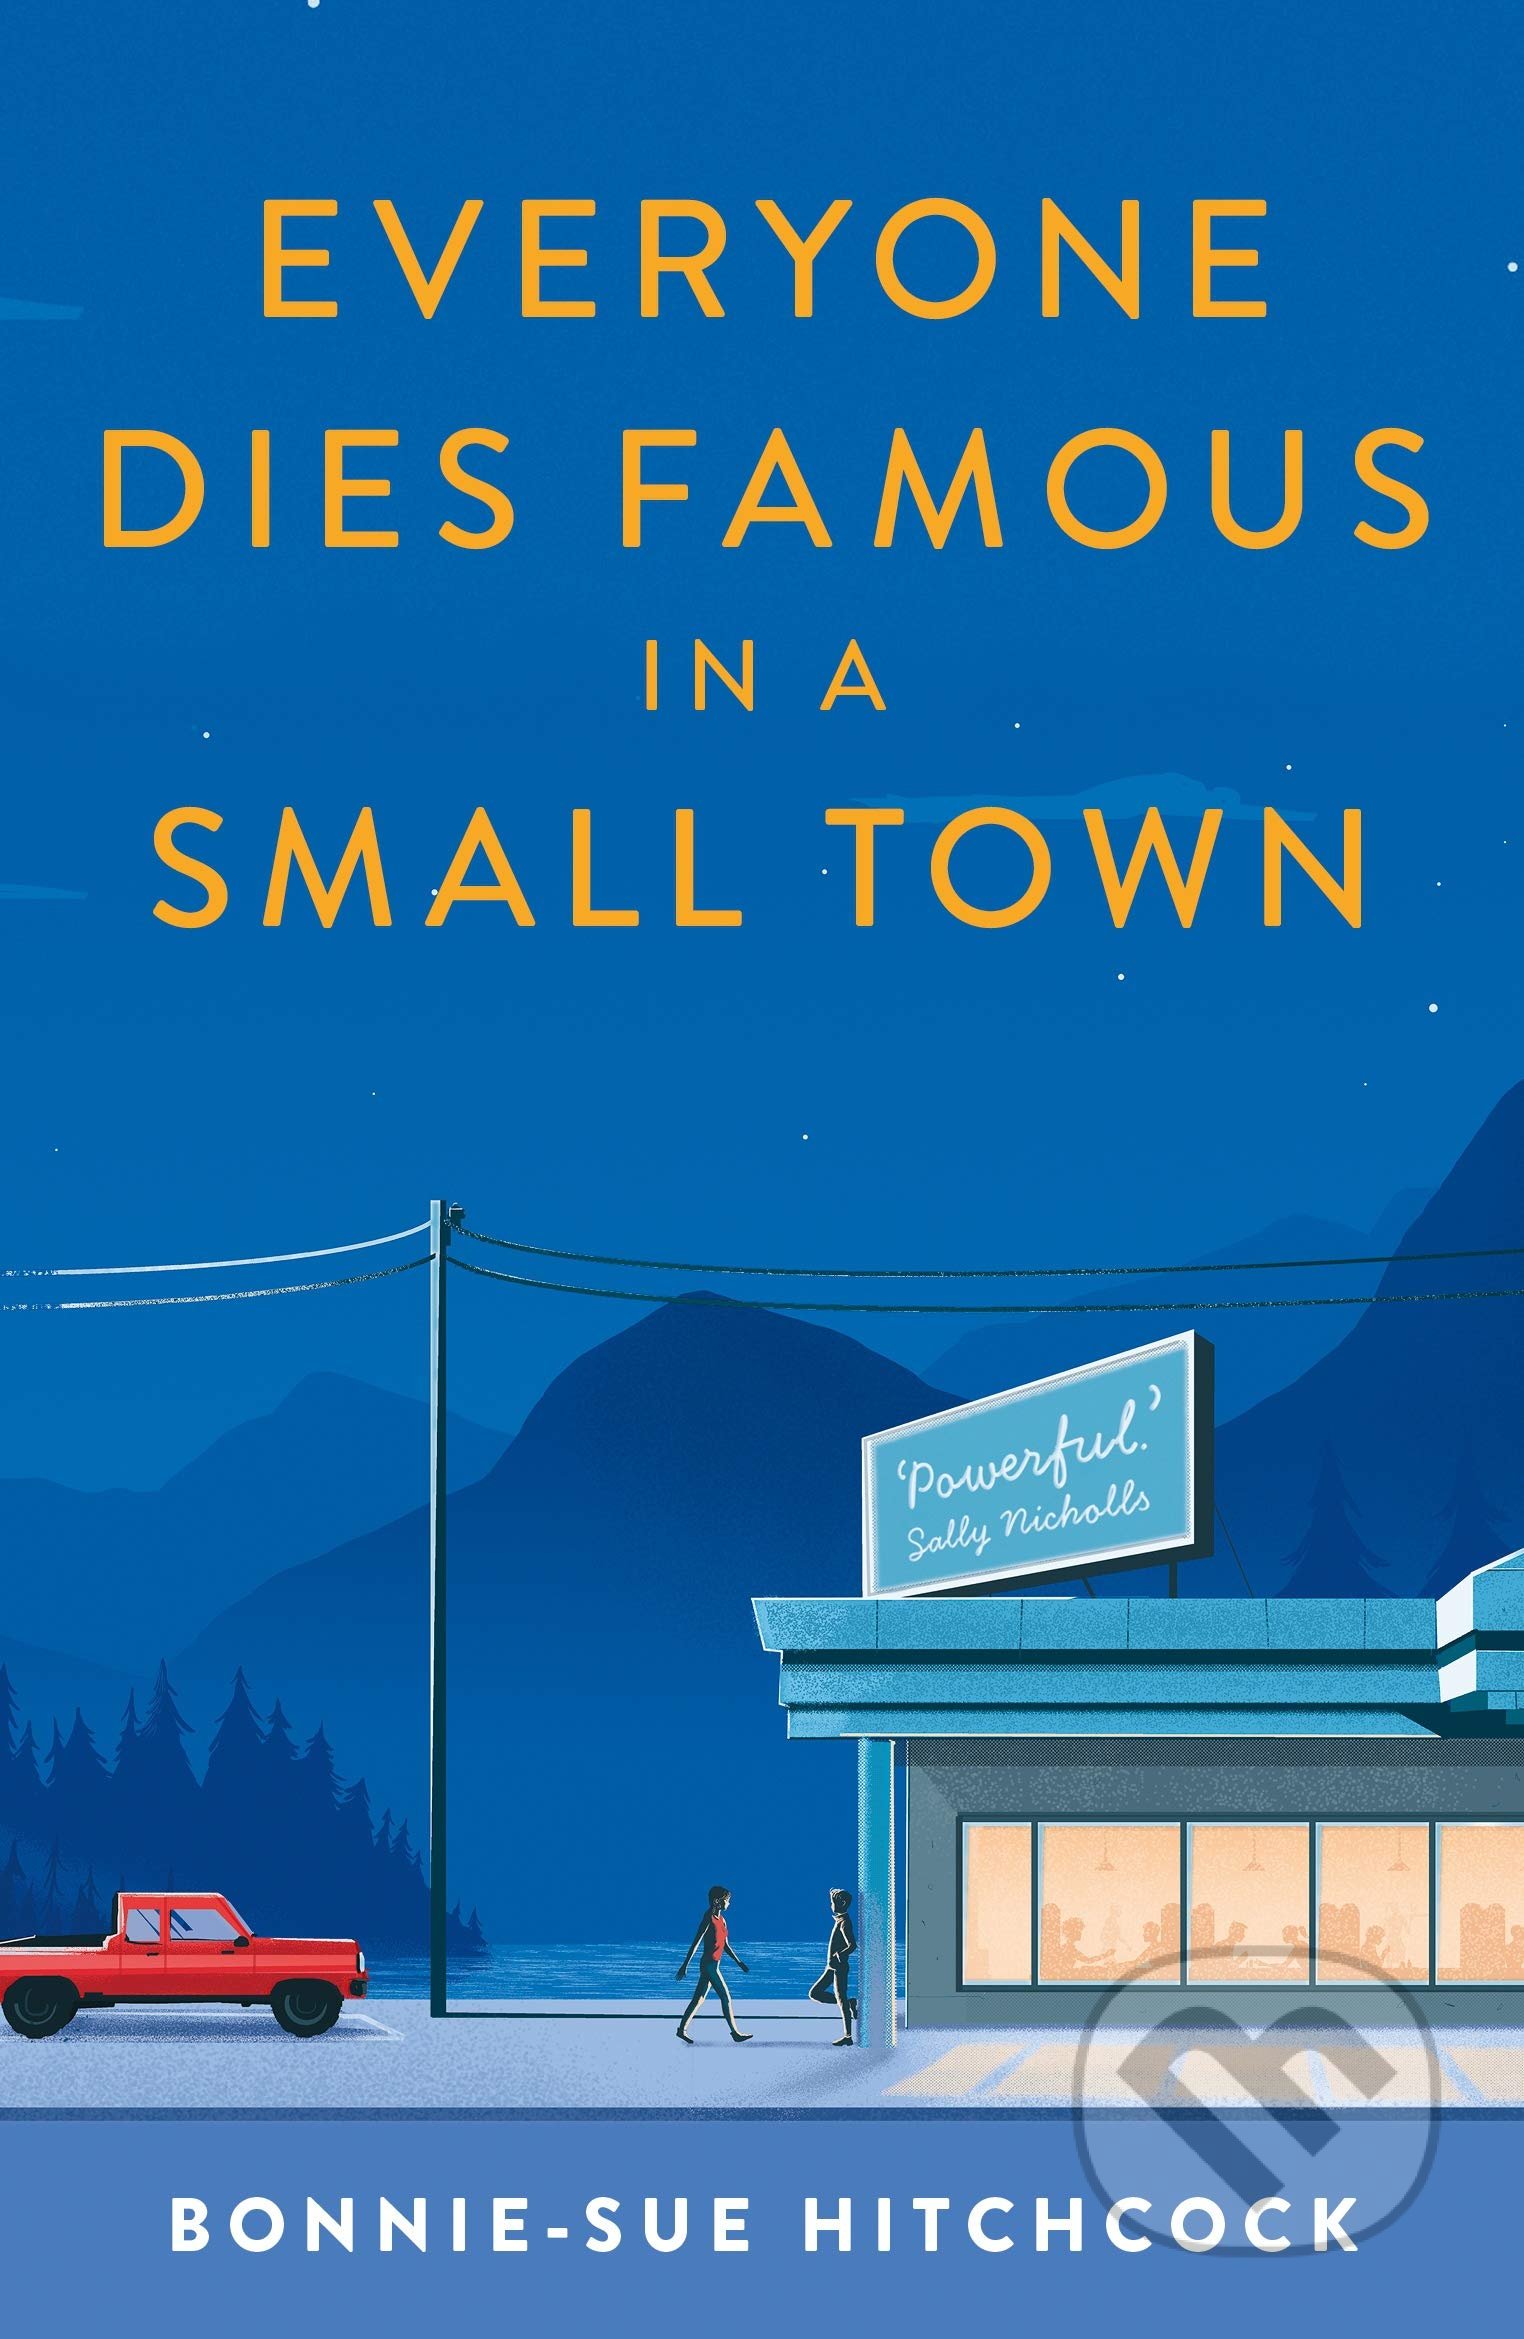 Everyone Dies Famous in a Small Town - Bonnie-Sue Hitchcock, FABER, 2021